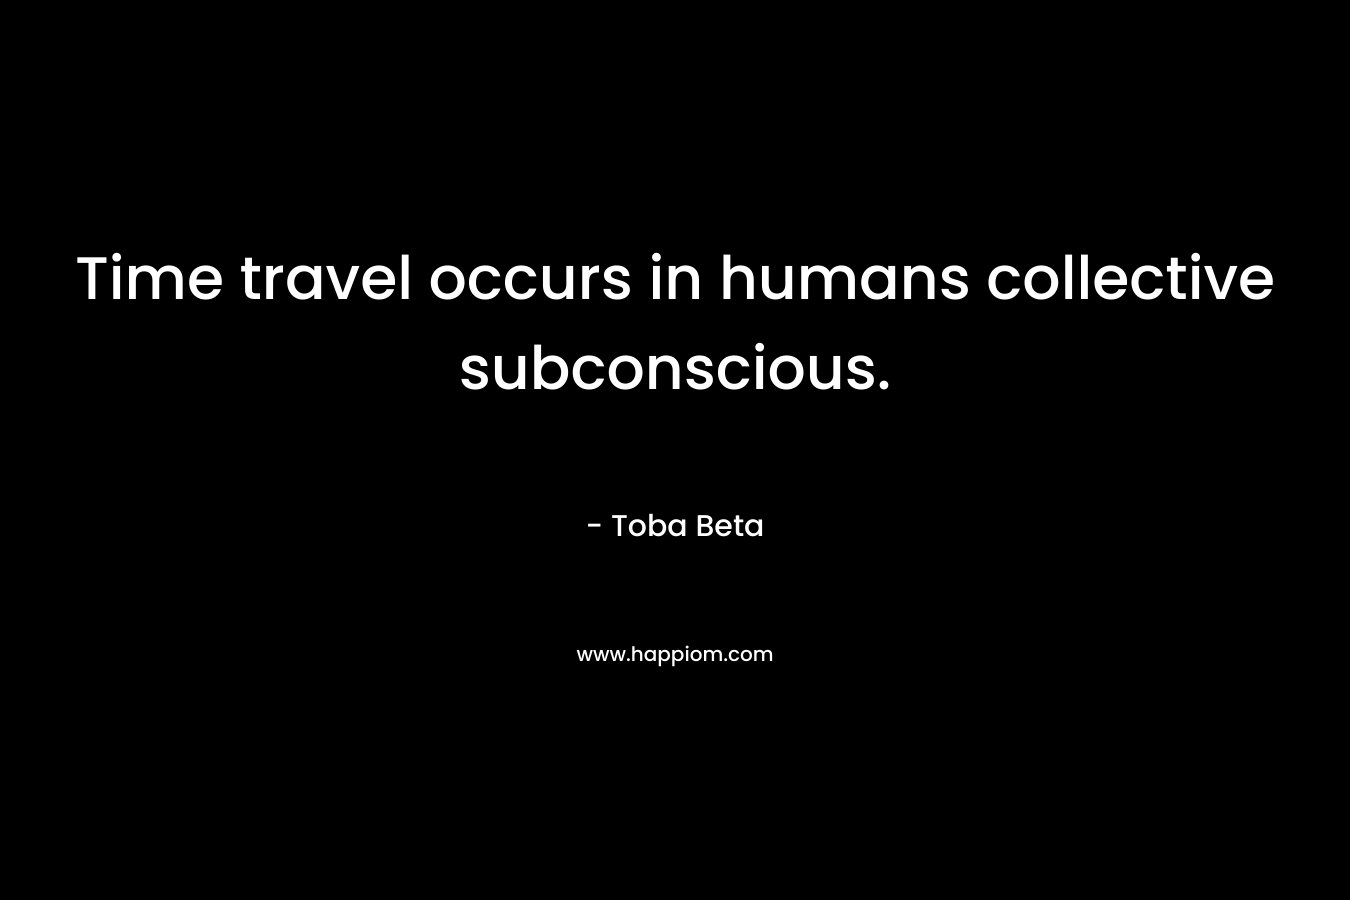 Time travel occurs in humans collective subconscious.